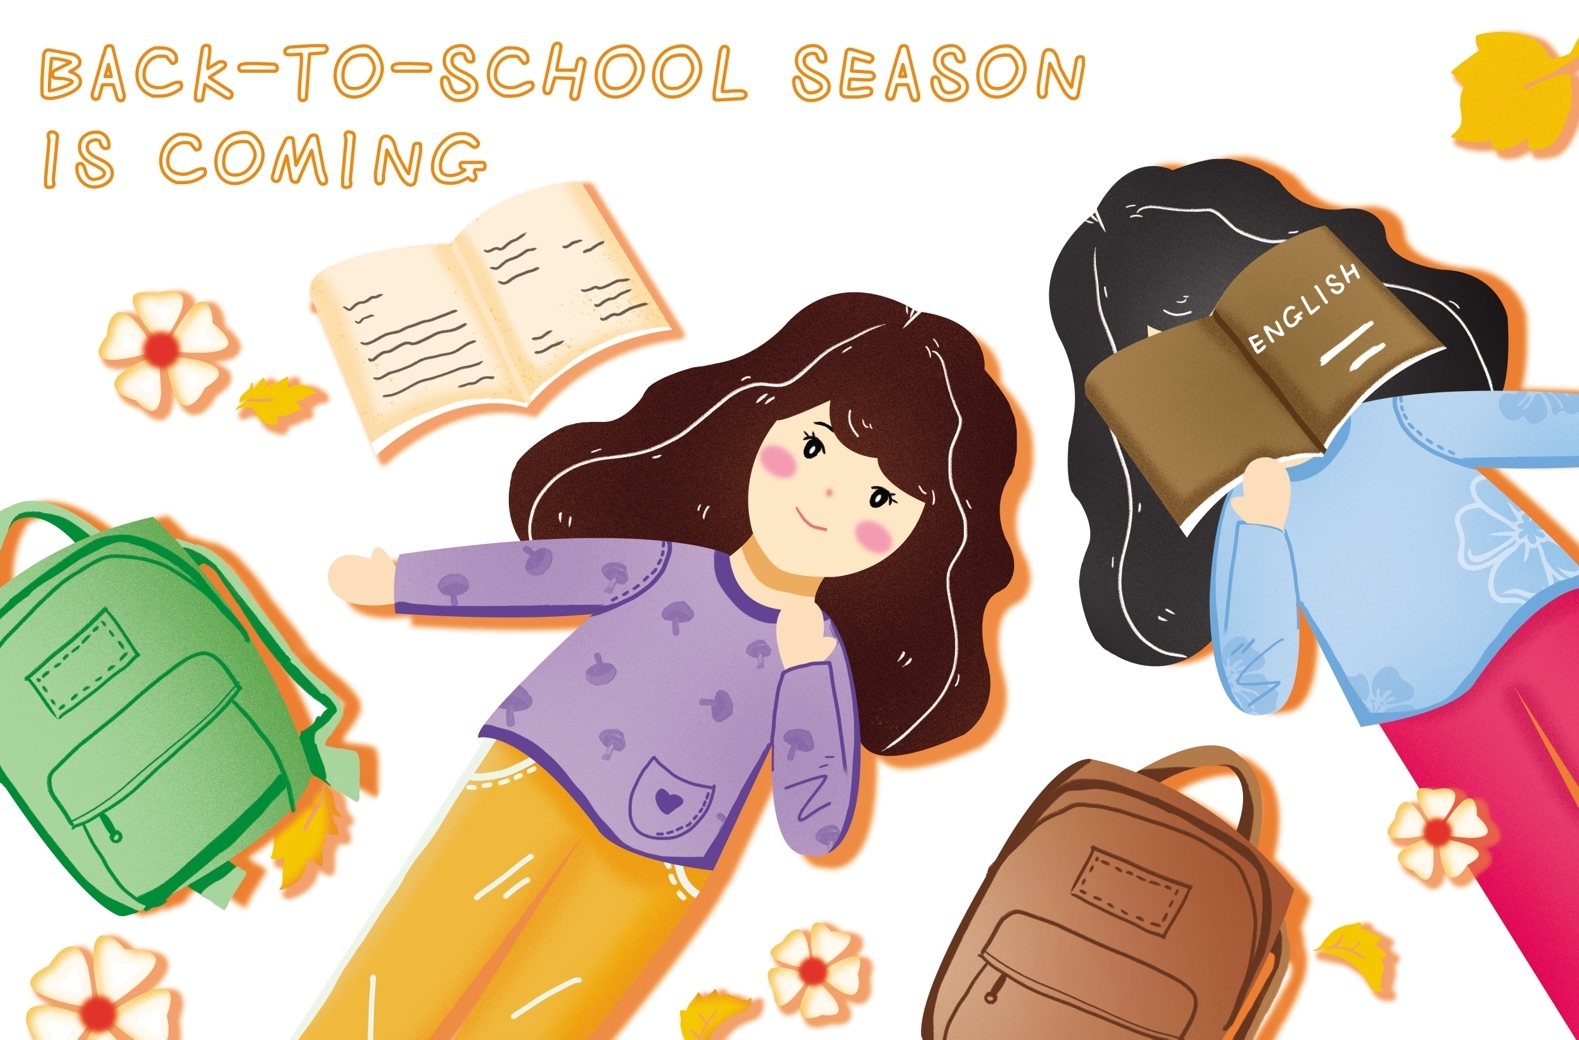 Are you Ready? Coming Soon: Back to School